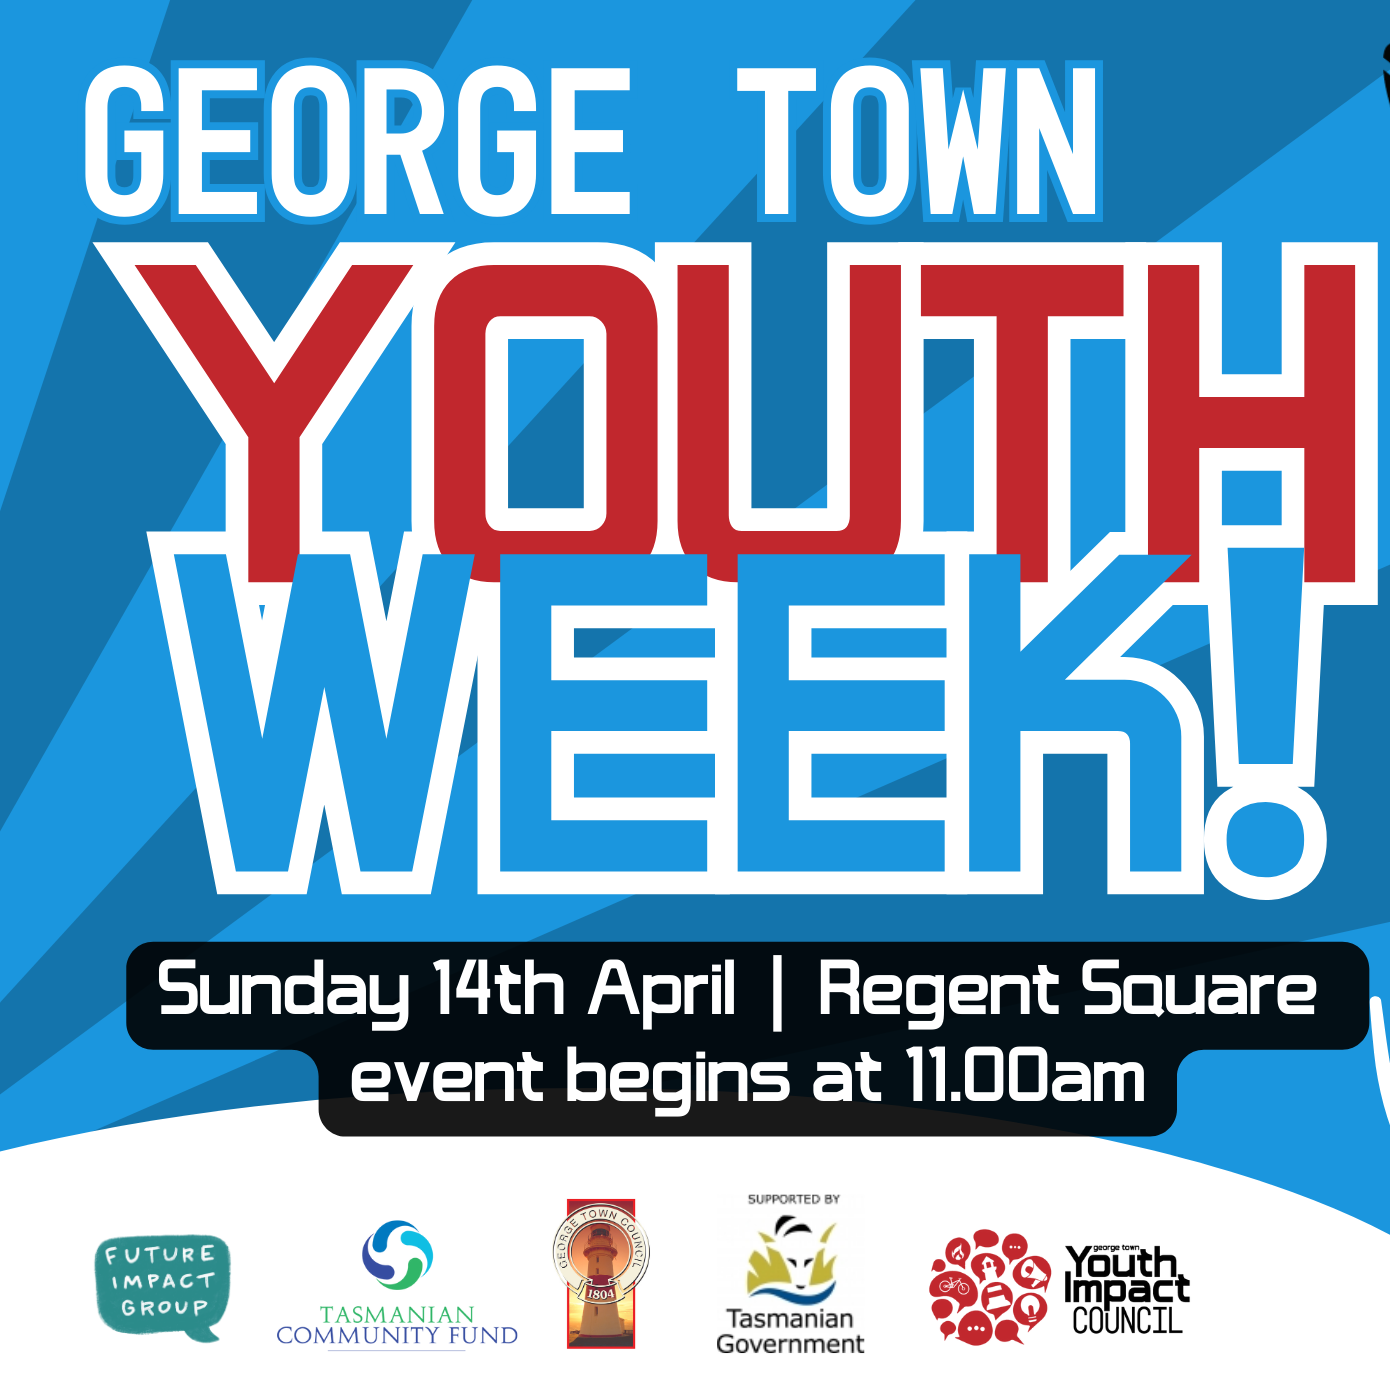 Graphic promoting George Town Youth Week on Saturday, 14th April from 11am